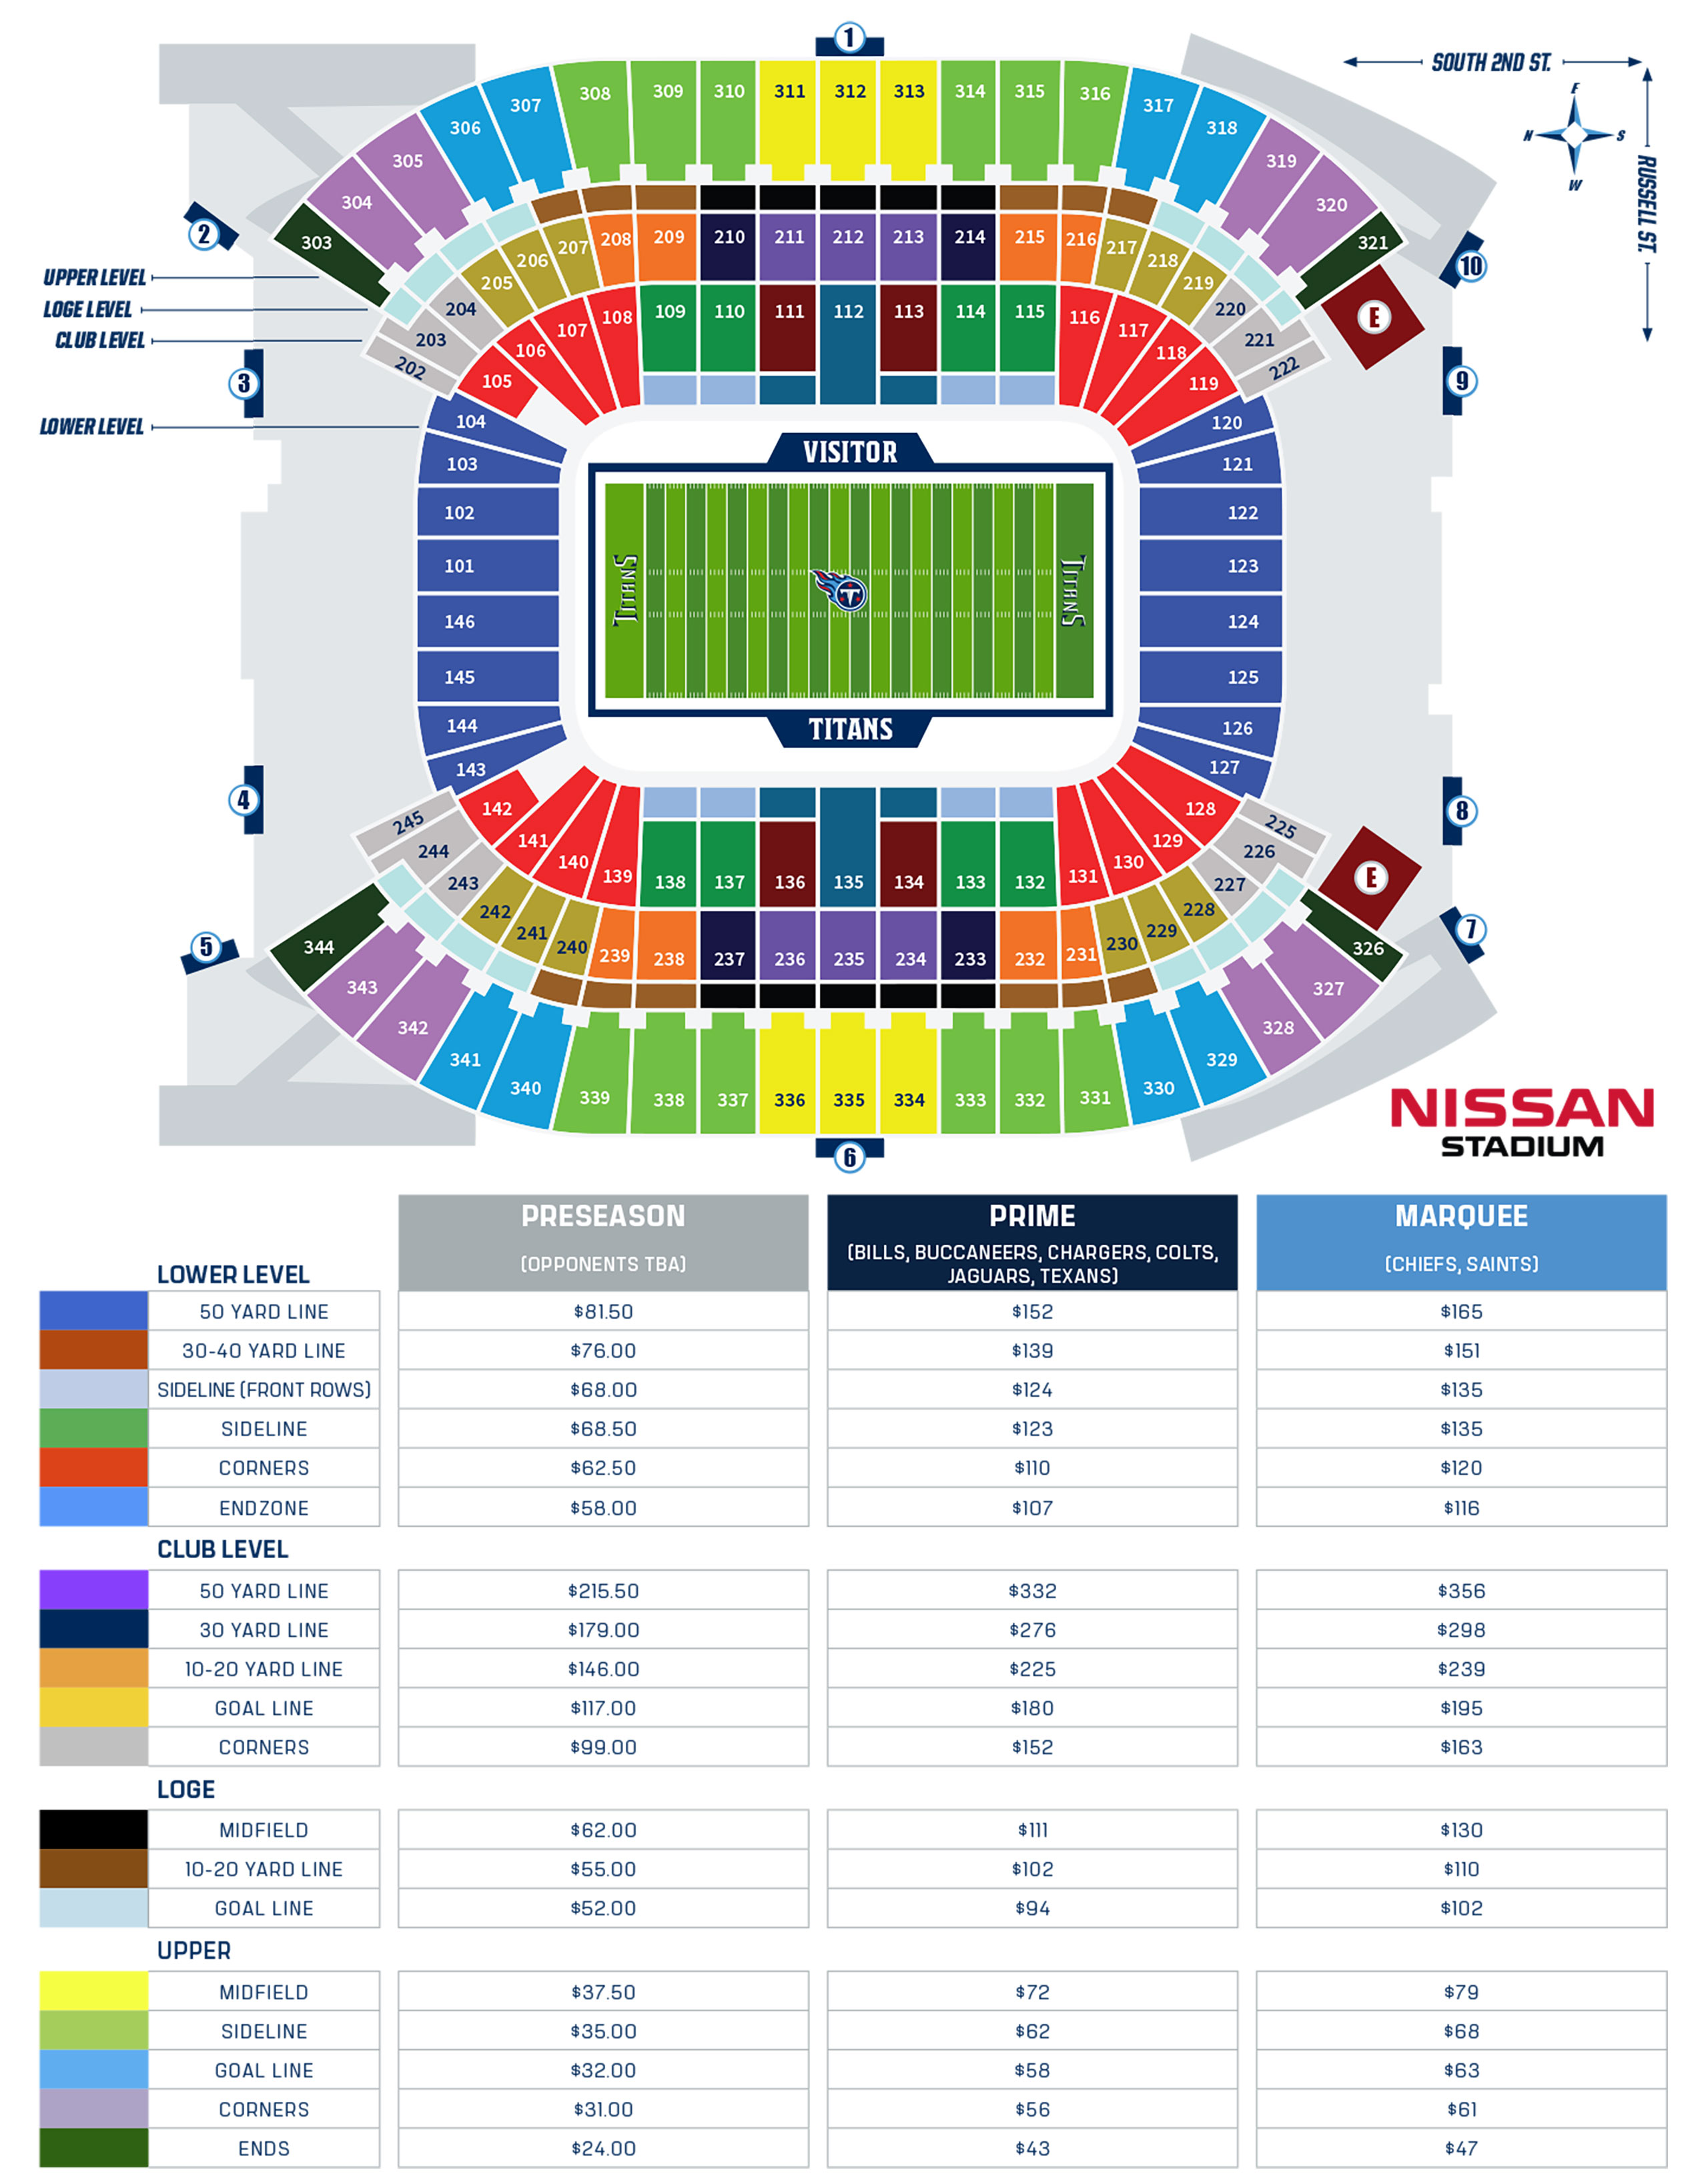 tennessee titans tickets 2021